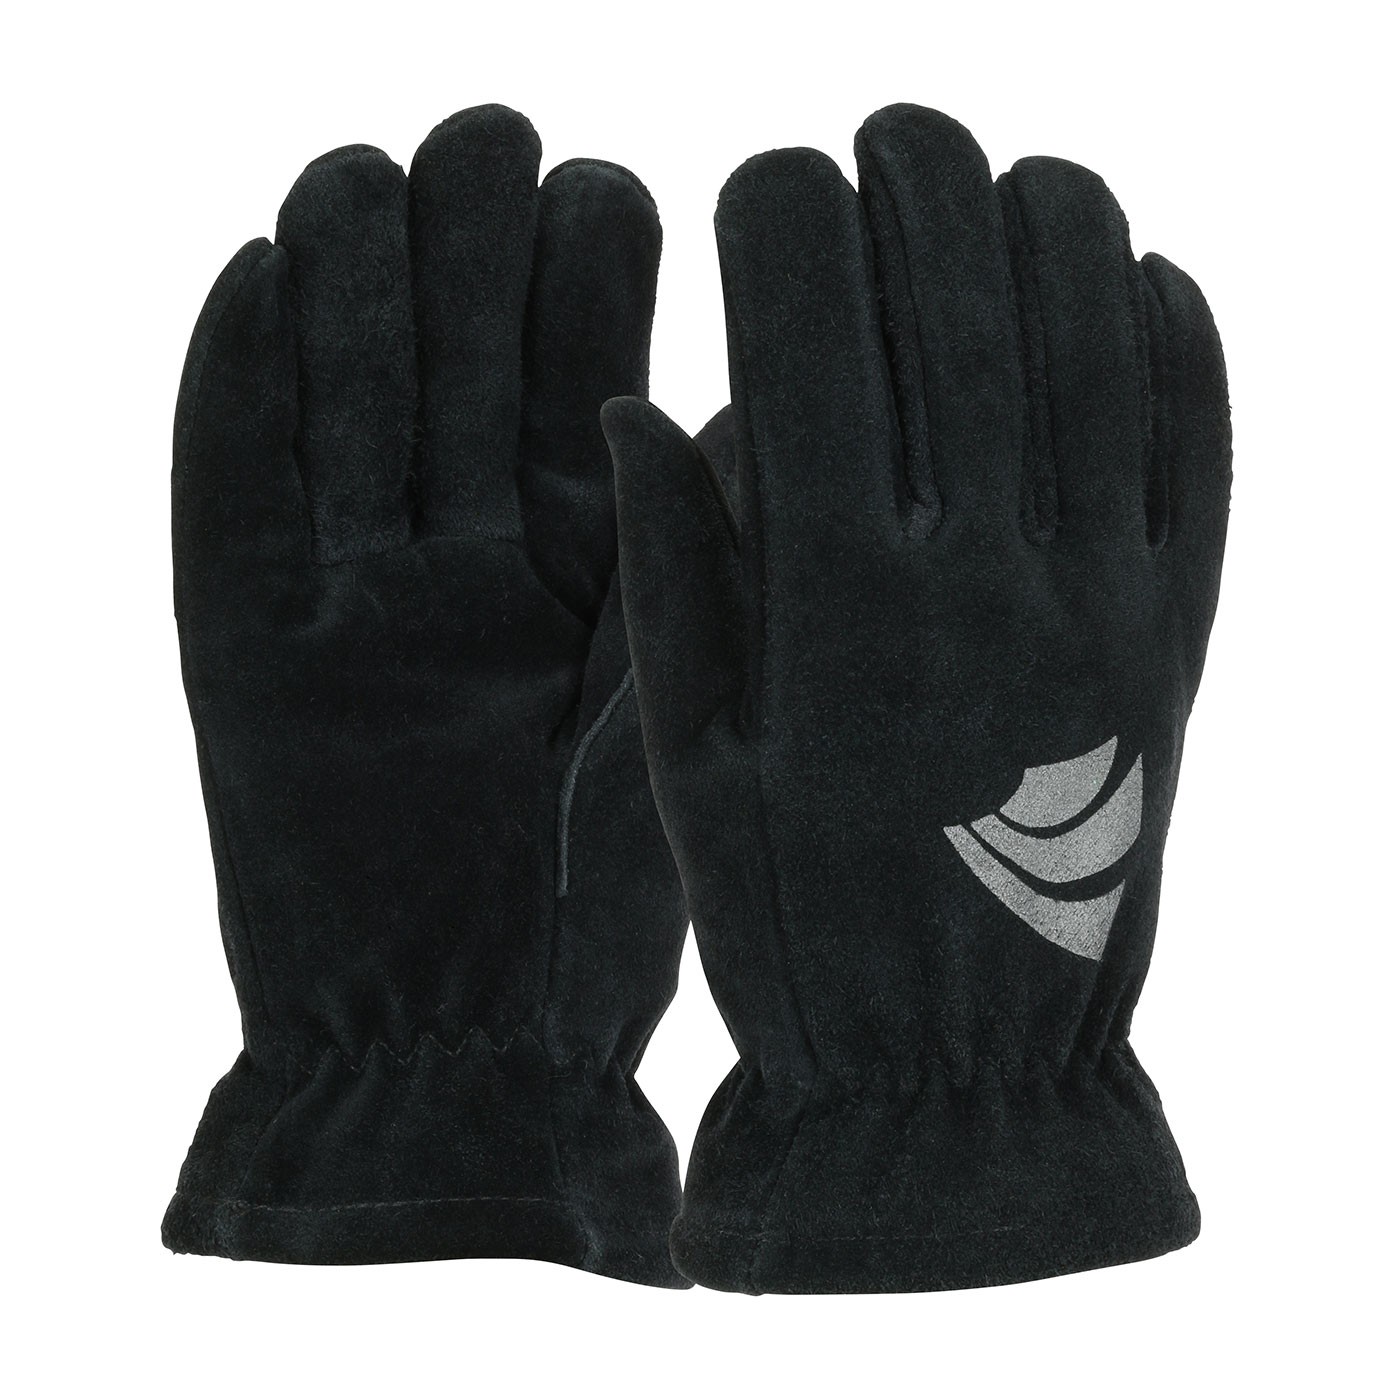 INNOTEX815™ Structural Firefighting 2D Glove with Split Cowhide Leather Shell and Kevlar® Stitching  (#910-P815)